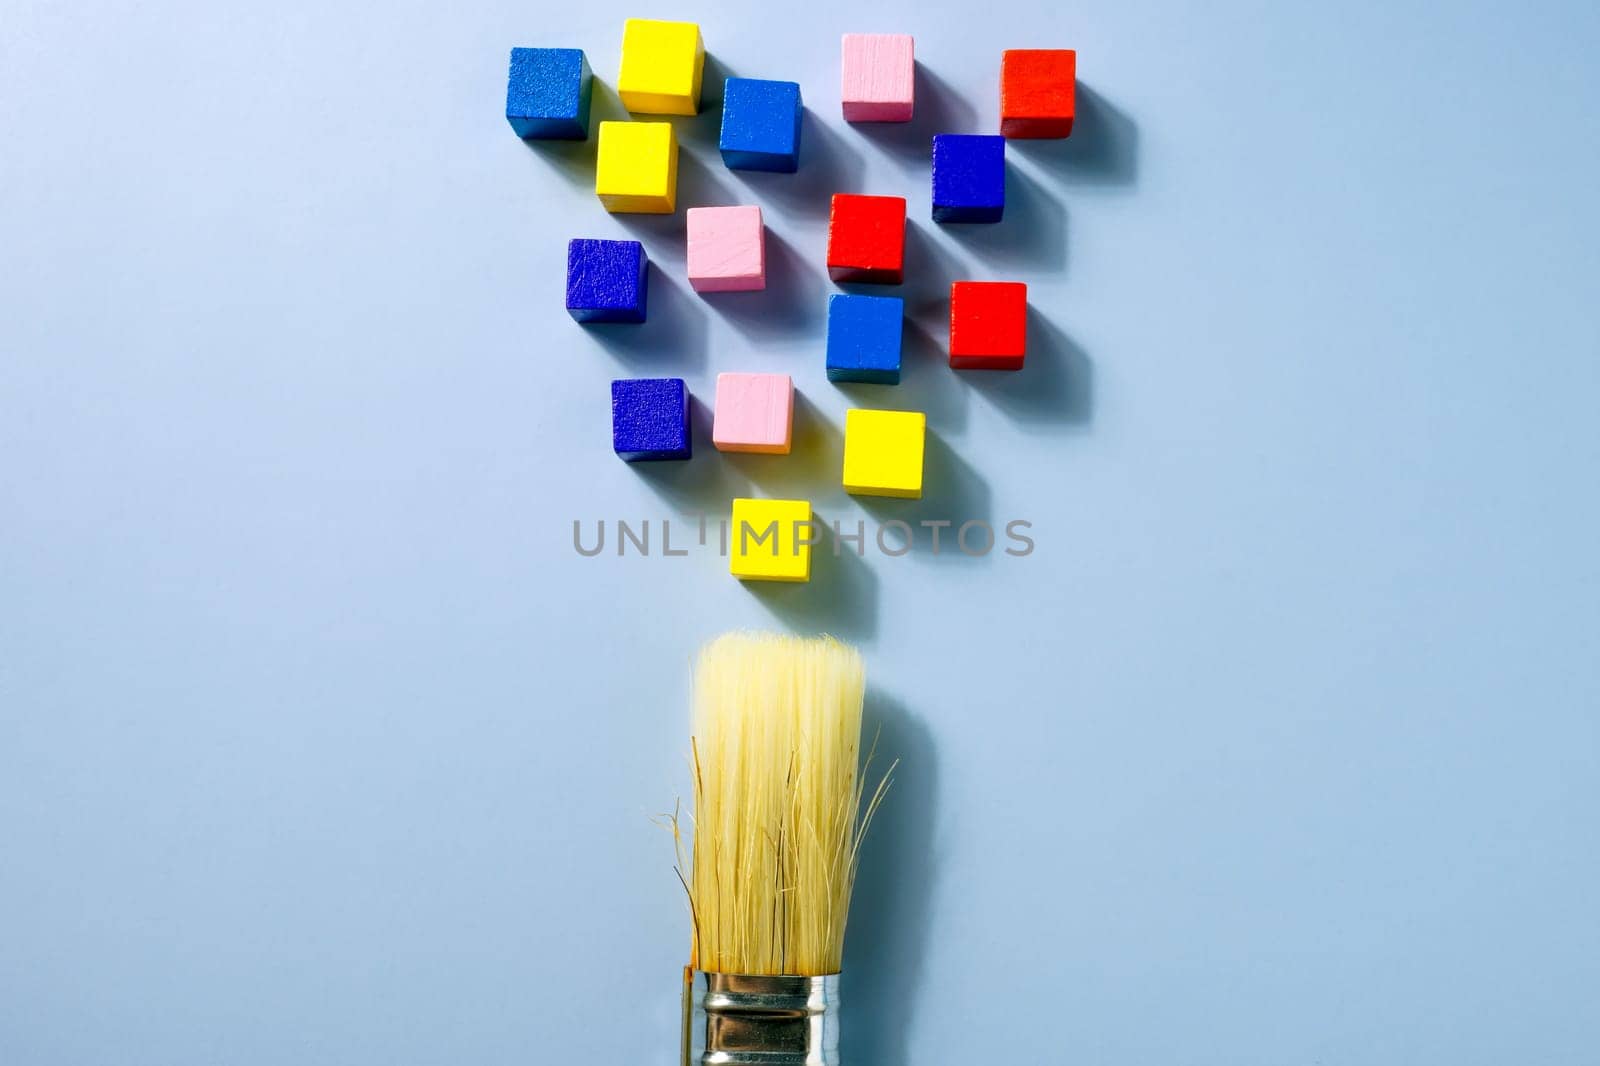 A brush and multi-colored cubes as symbol of creativity and a non-standard approach. by designer491